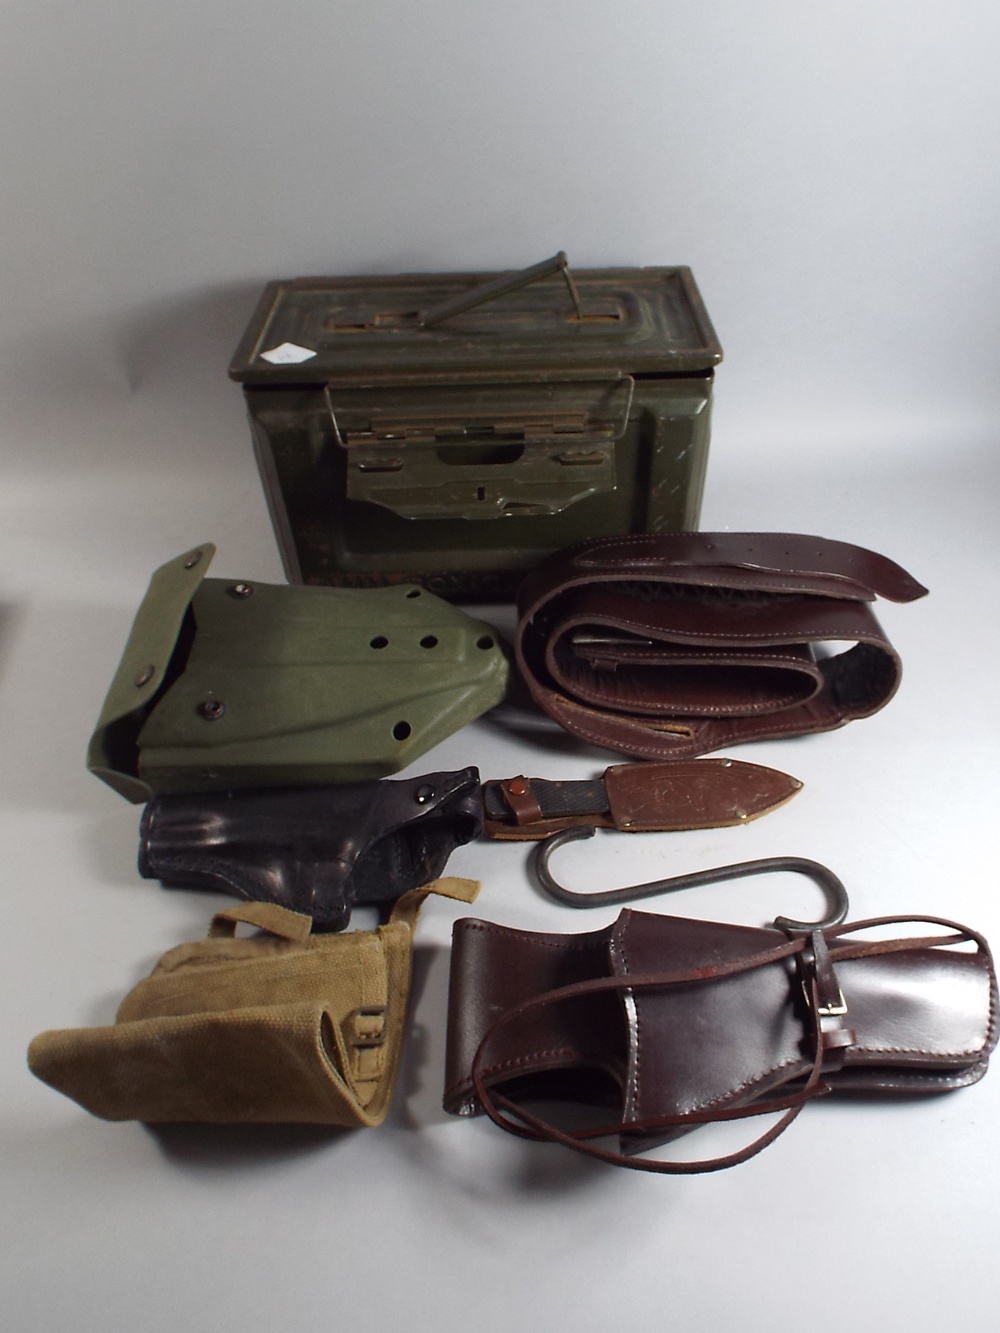 A Fifty Cal Ammunition Box Containing 1984 Dated Entrenching Tool, Modern Gun Holster and Belt,